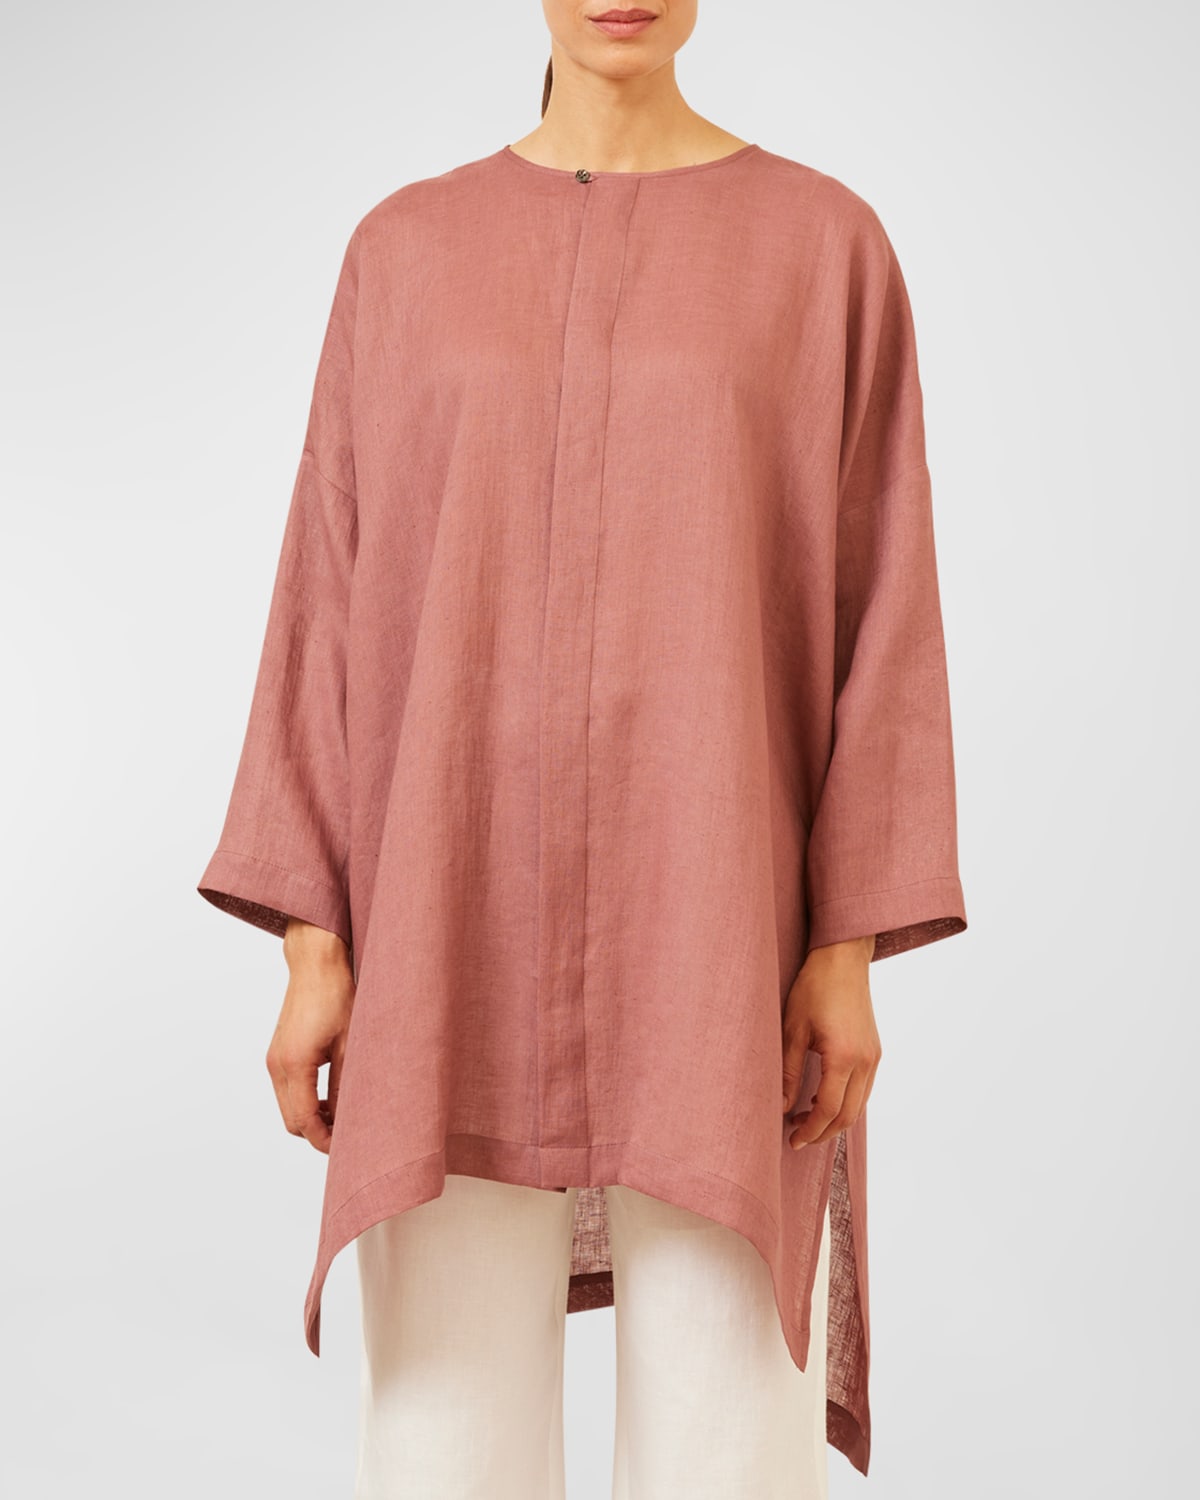 Wide Longer-Back Bound Neck Shirt (Very Long Length) With Slits